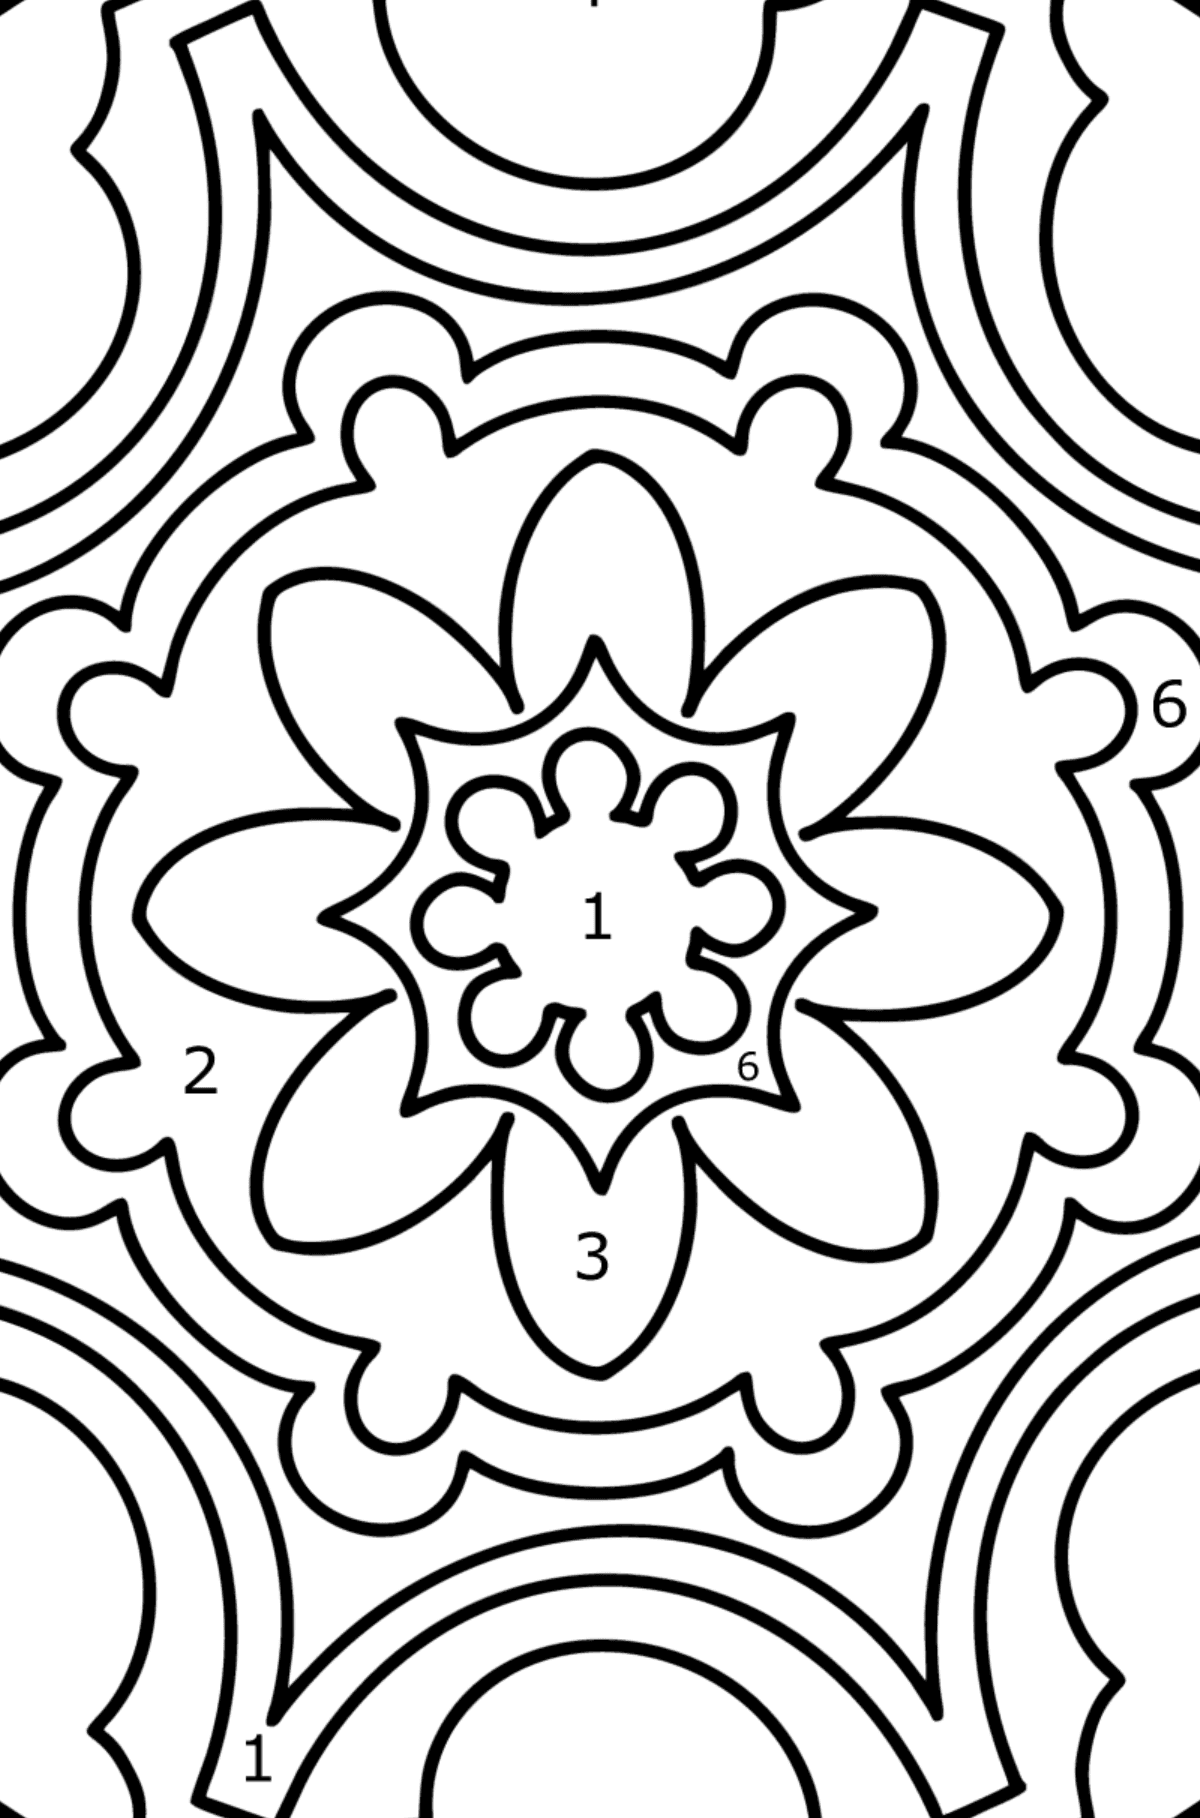 Mandala coloring page - 9 elements - Coloring by Numbers for Kids